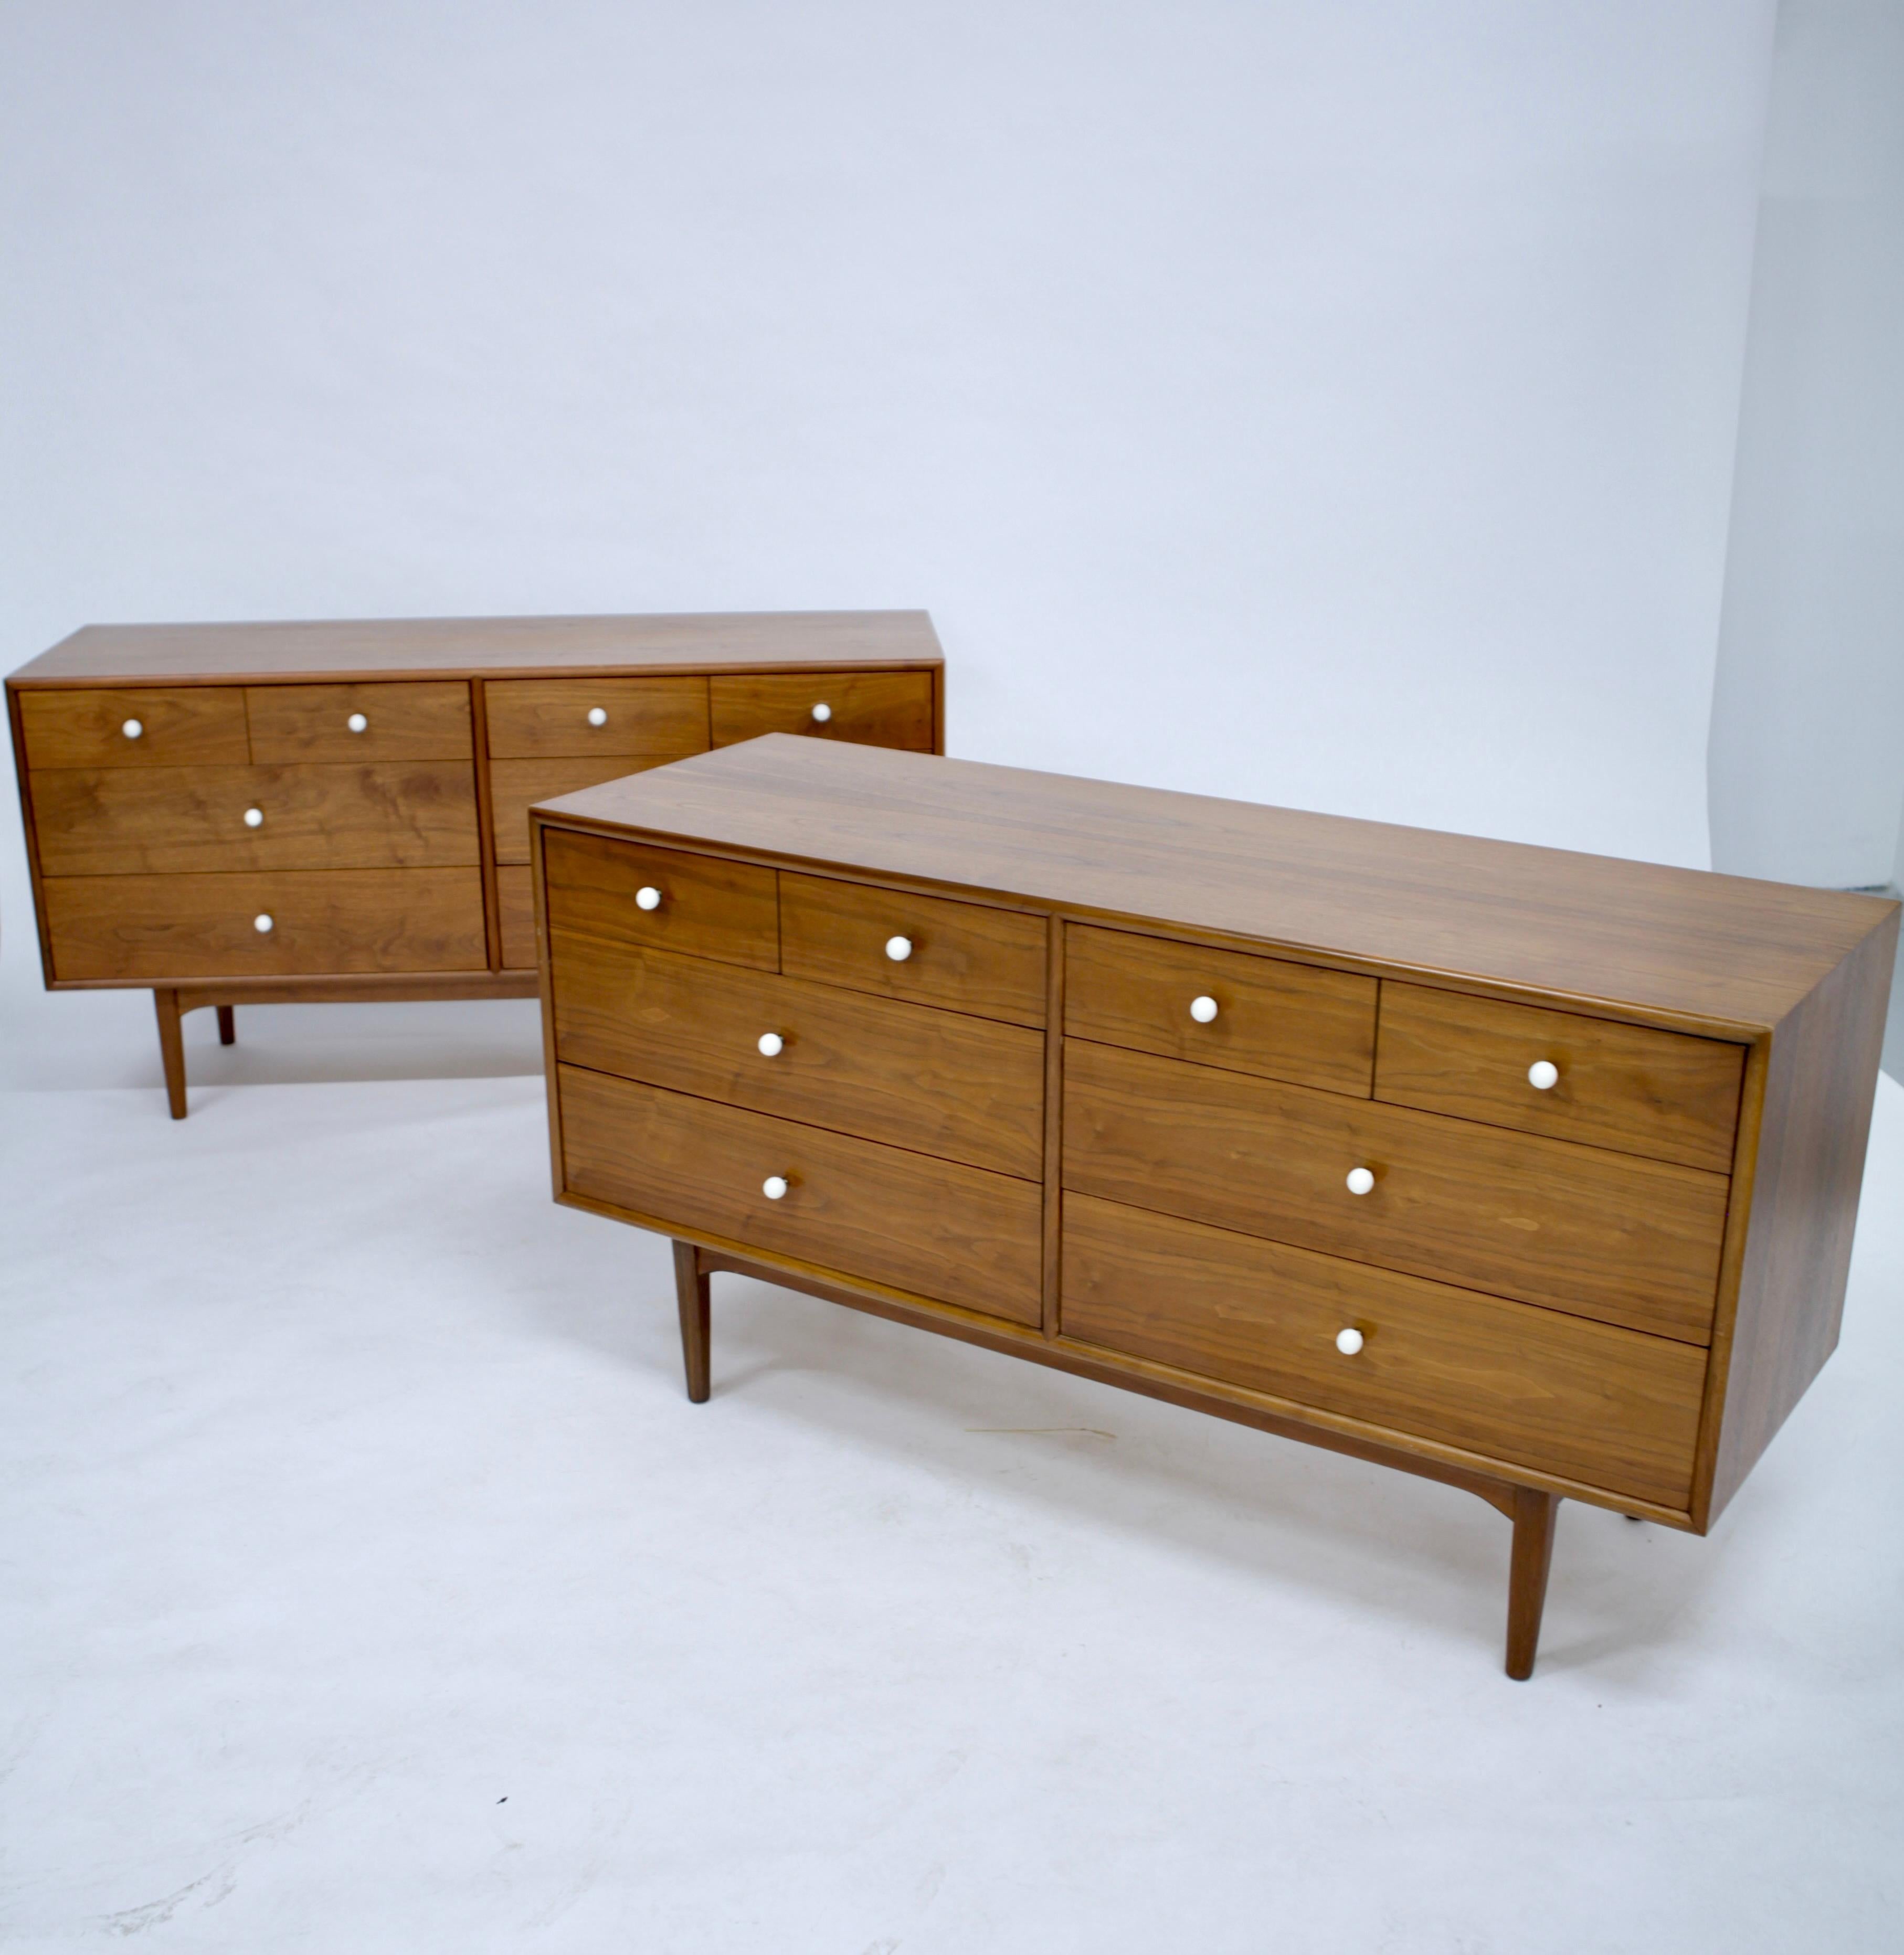 Kipp Stewart & Stewart MacDougail, a pair commodes or sideboards in walnut and White porcelain knobs. Model 861-121-2
Edition Drexel, United States 1950s.
Very nice vintage condition.
